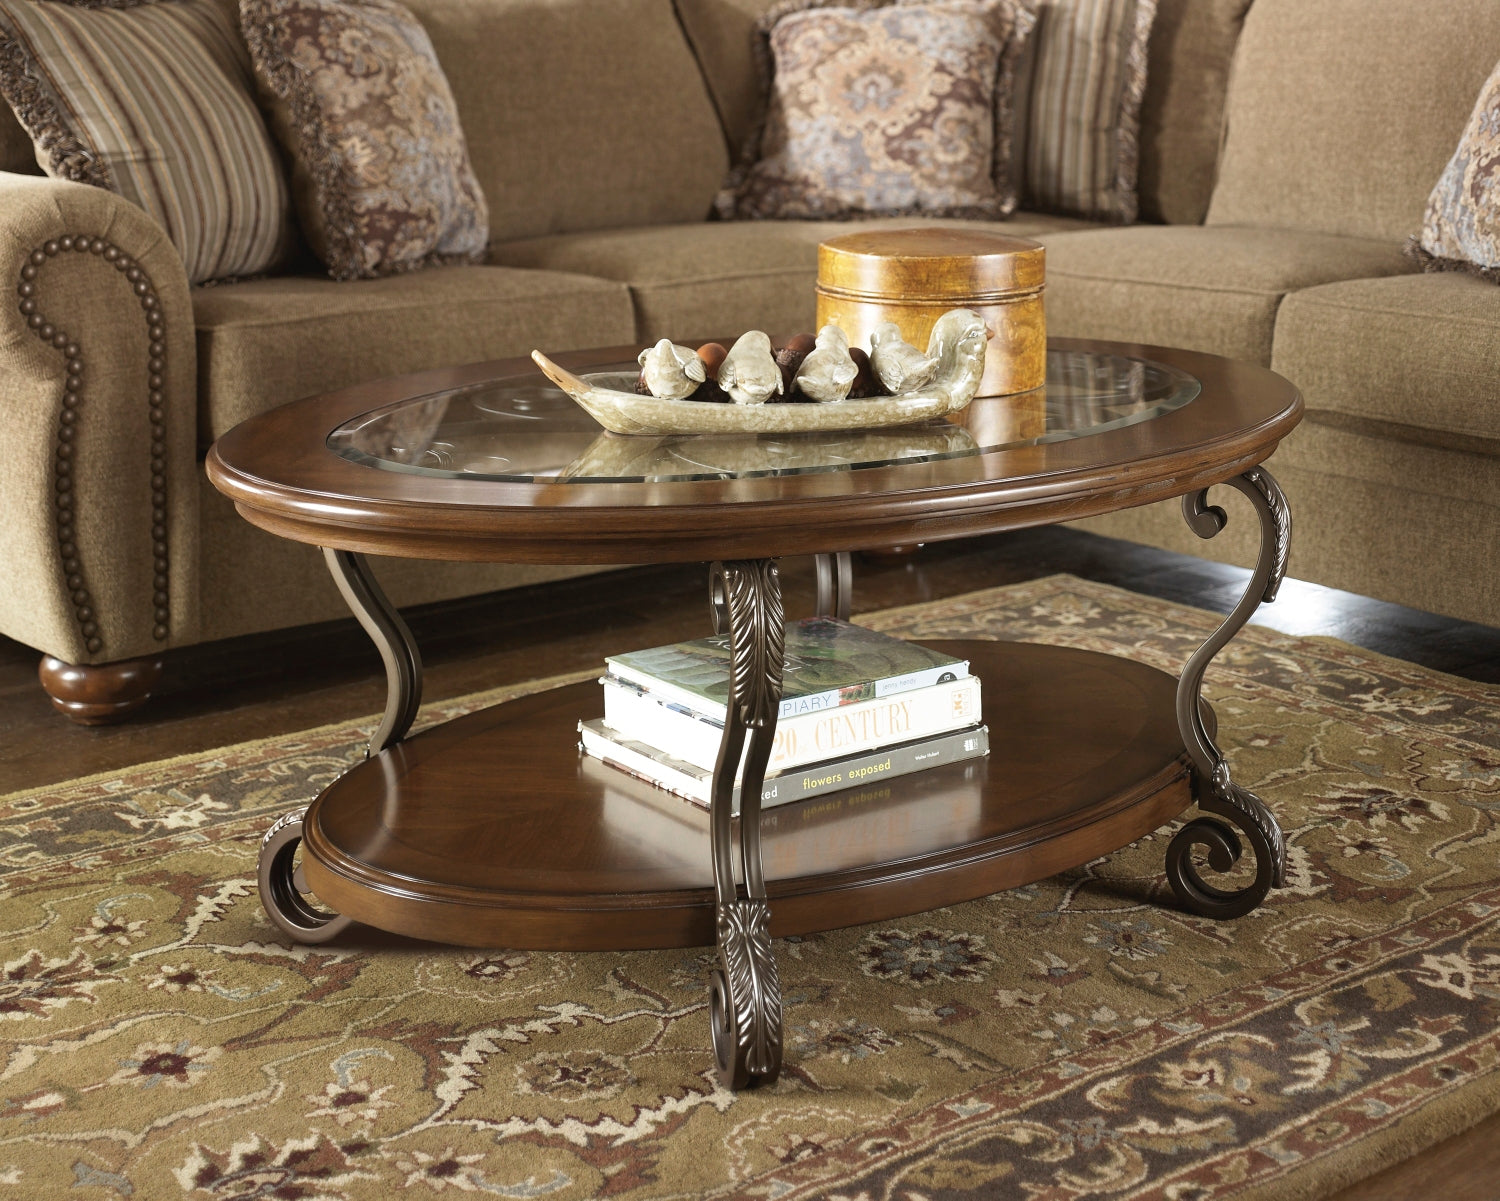 Nestor Coffee Table with 1 End Table Wilson Furniture (OH)  in Bridgeport, Ohio. Serving Bridgeport, Yorkville, Bellaire, & Avondale